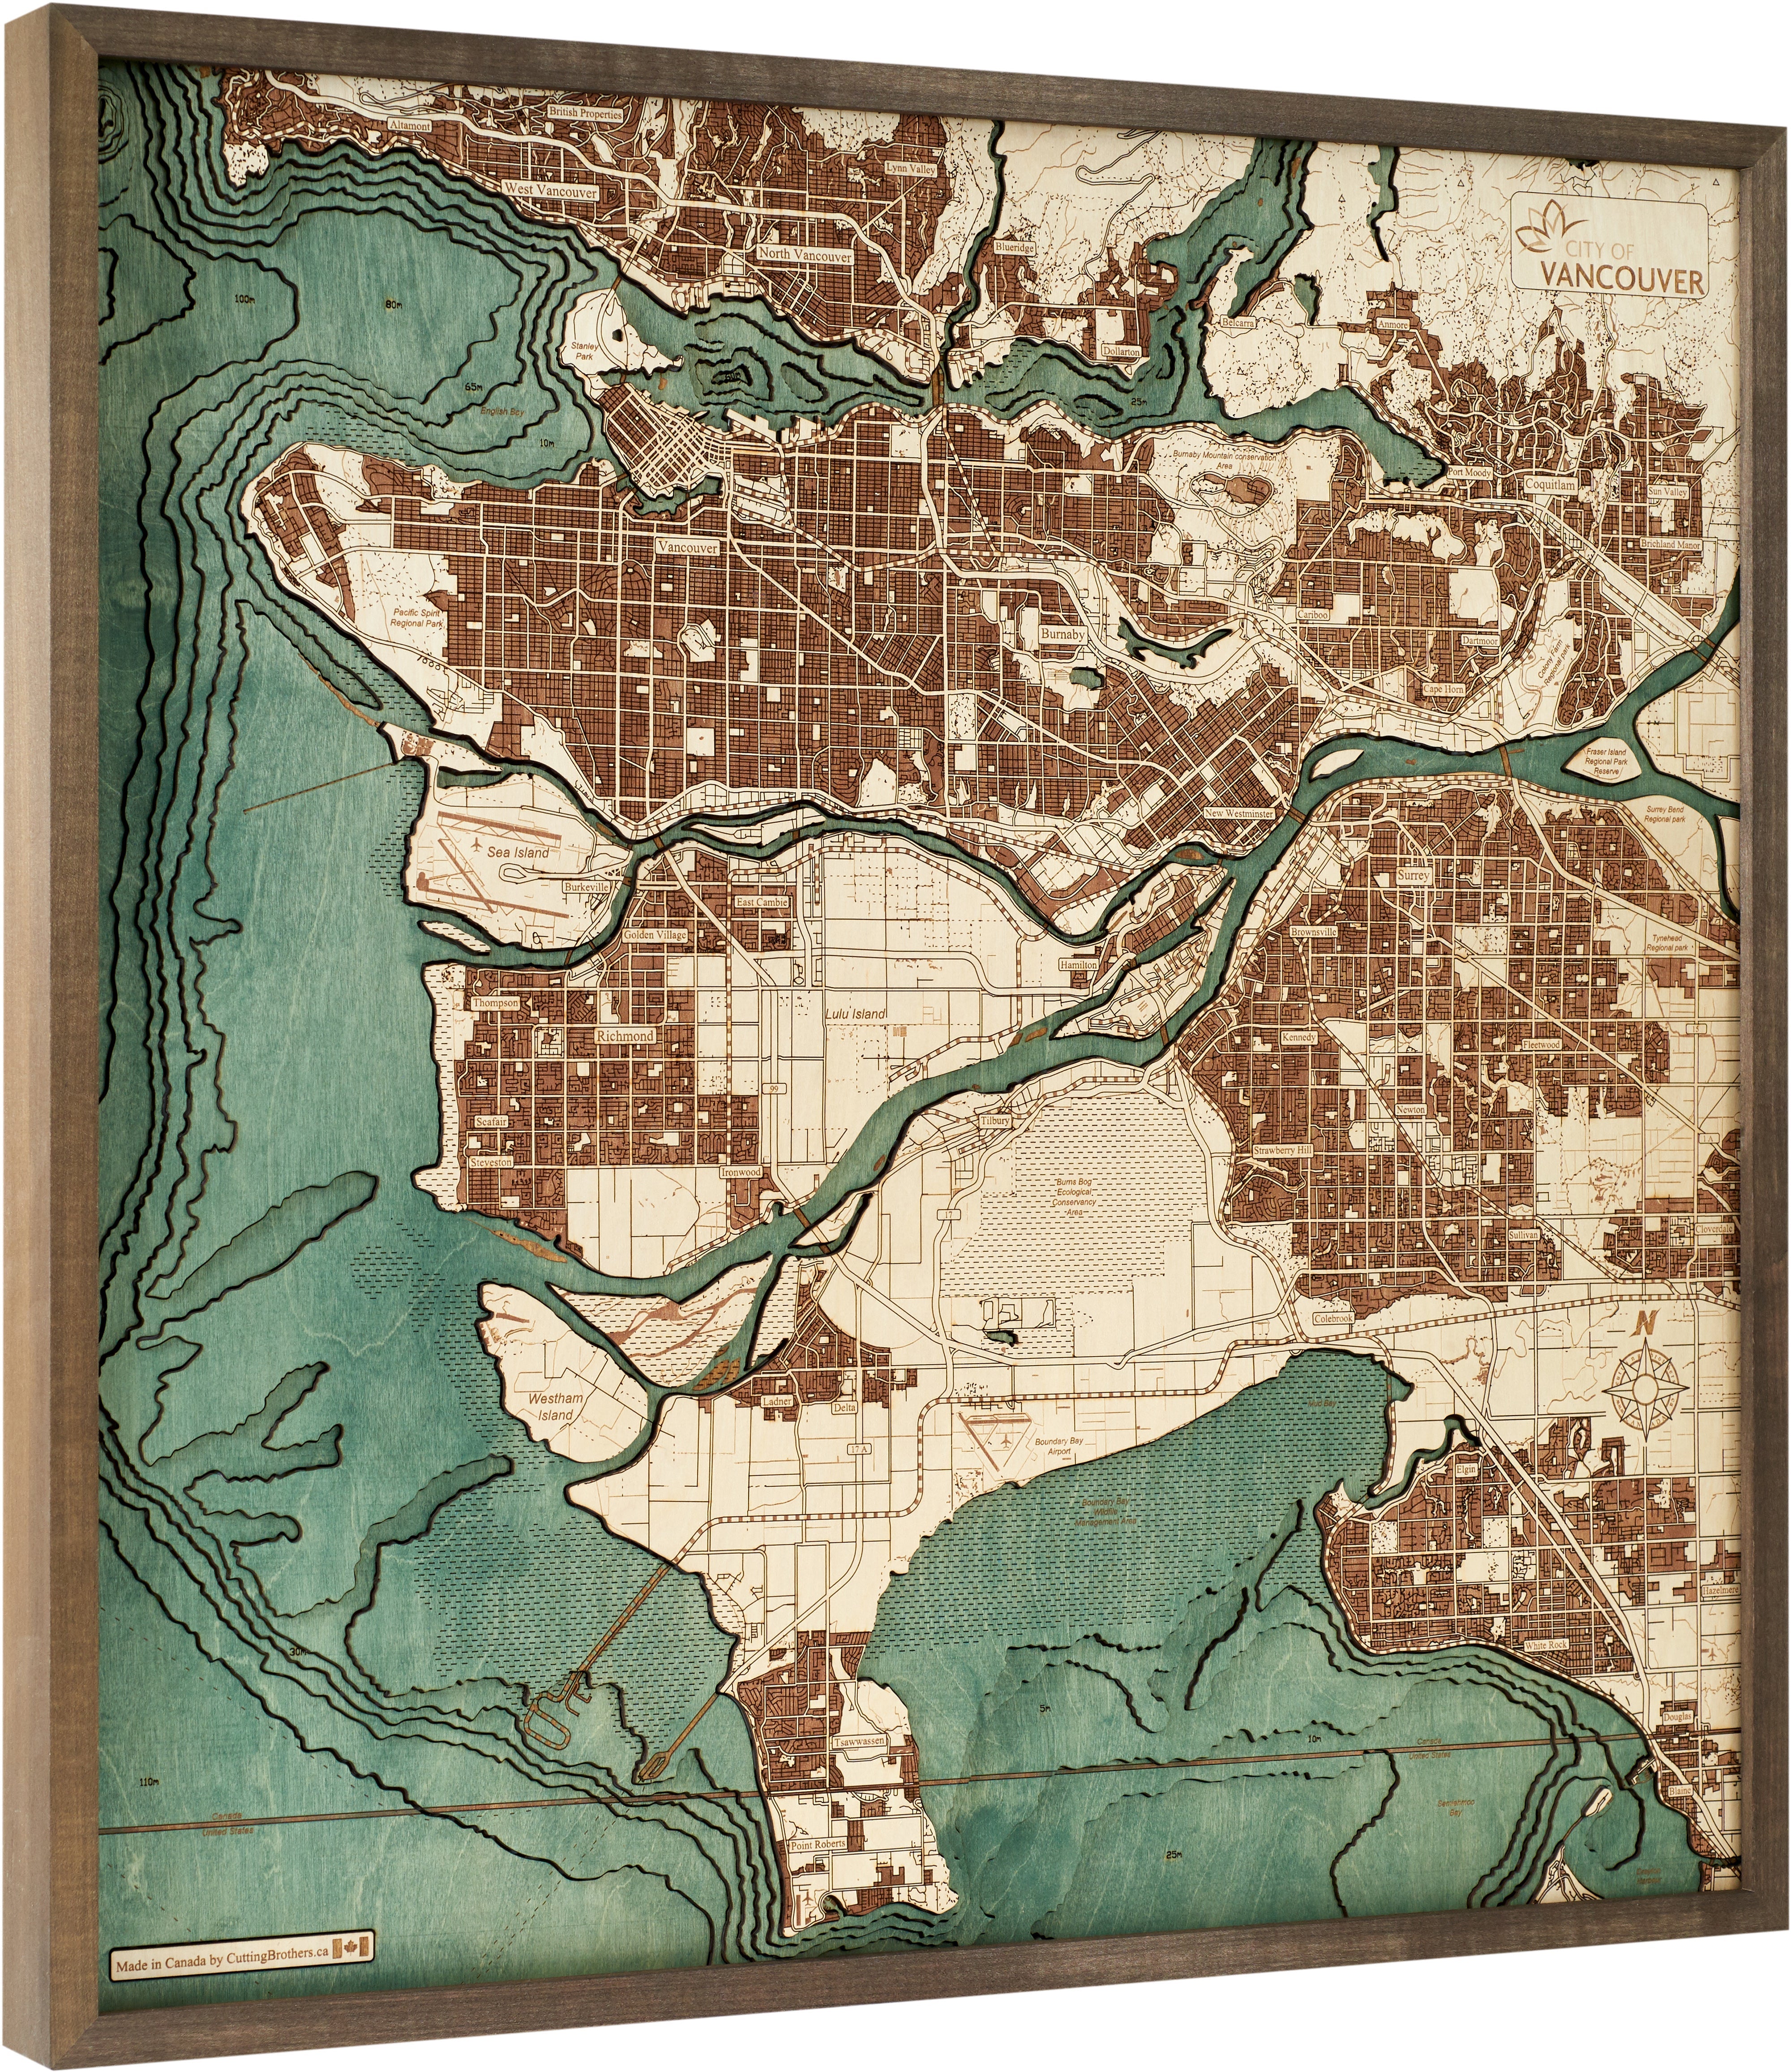 VANCOUVER 3D WOODEN WALL MAP - Version L